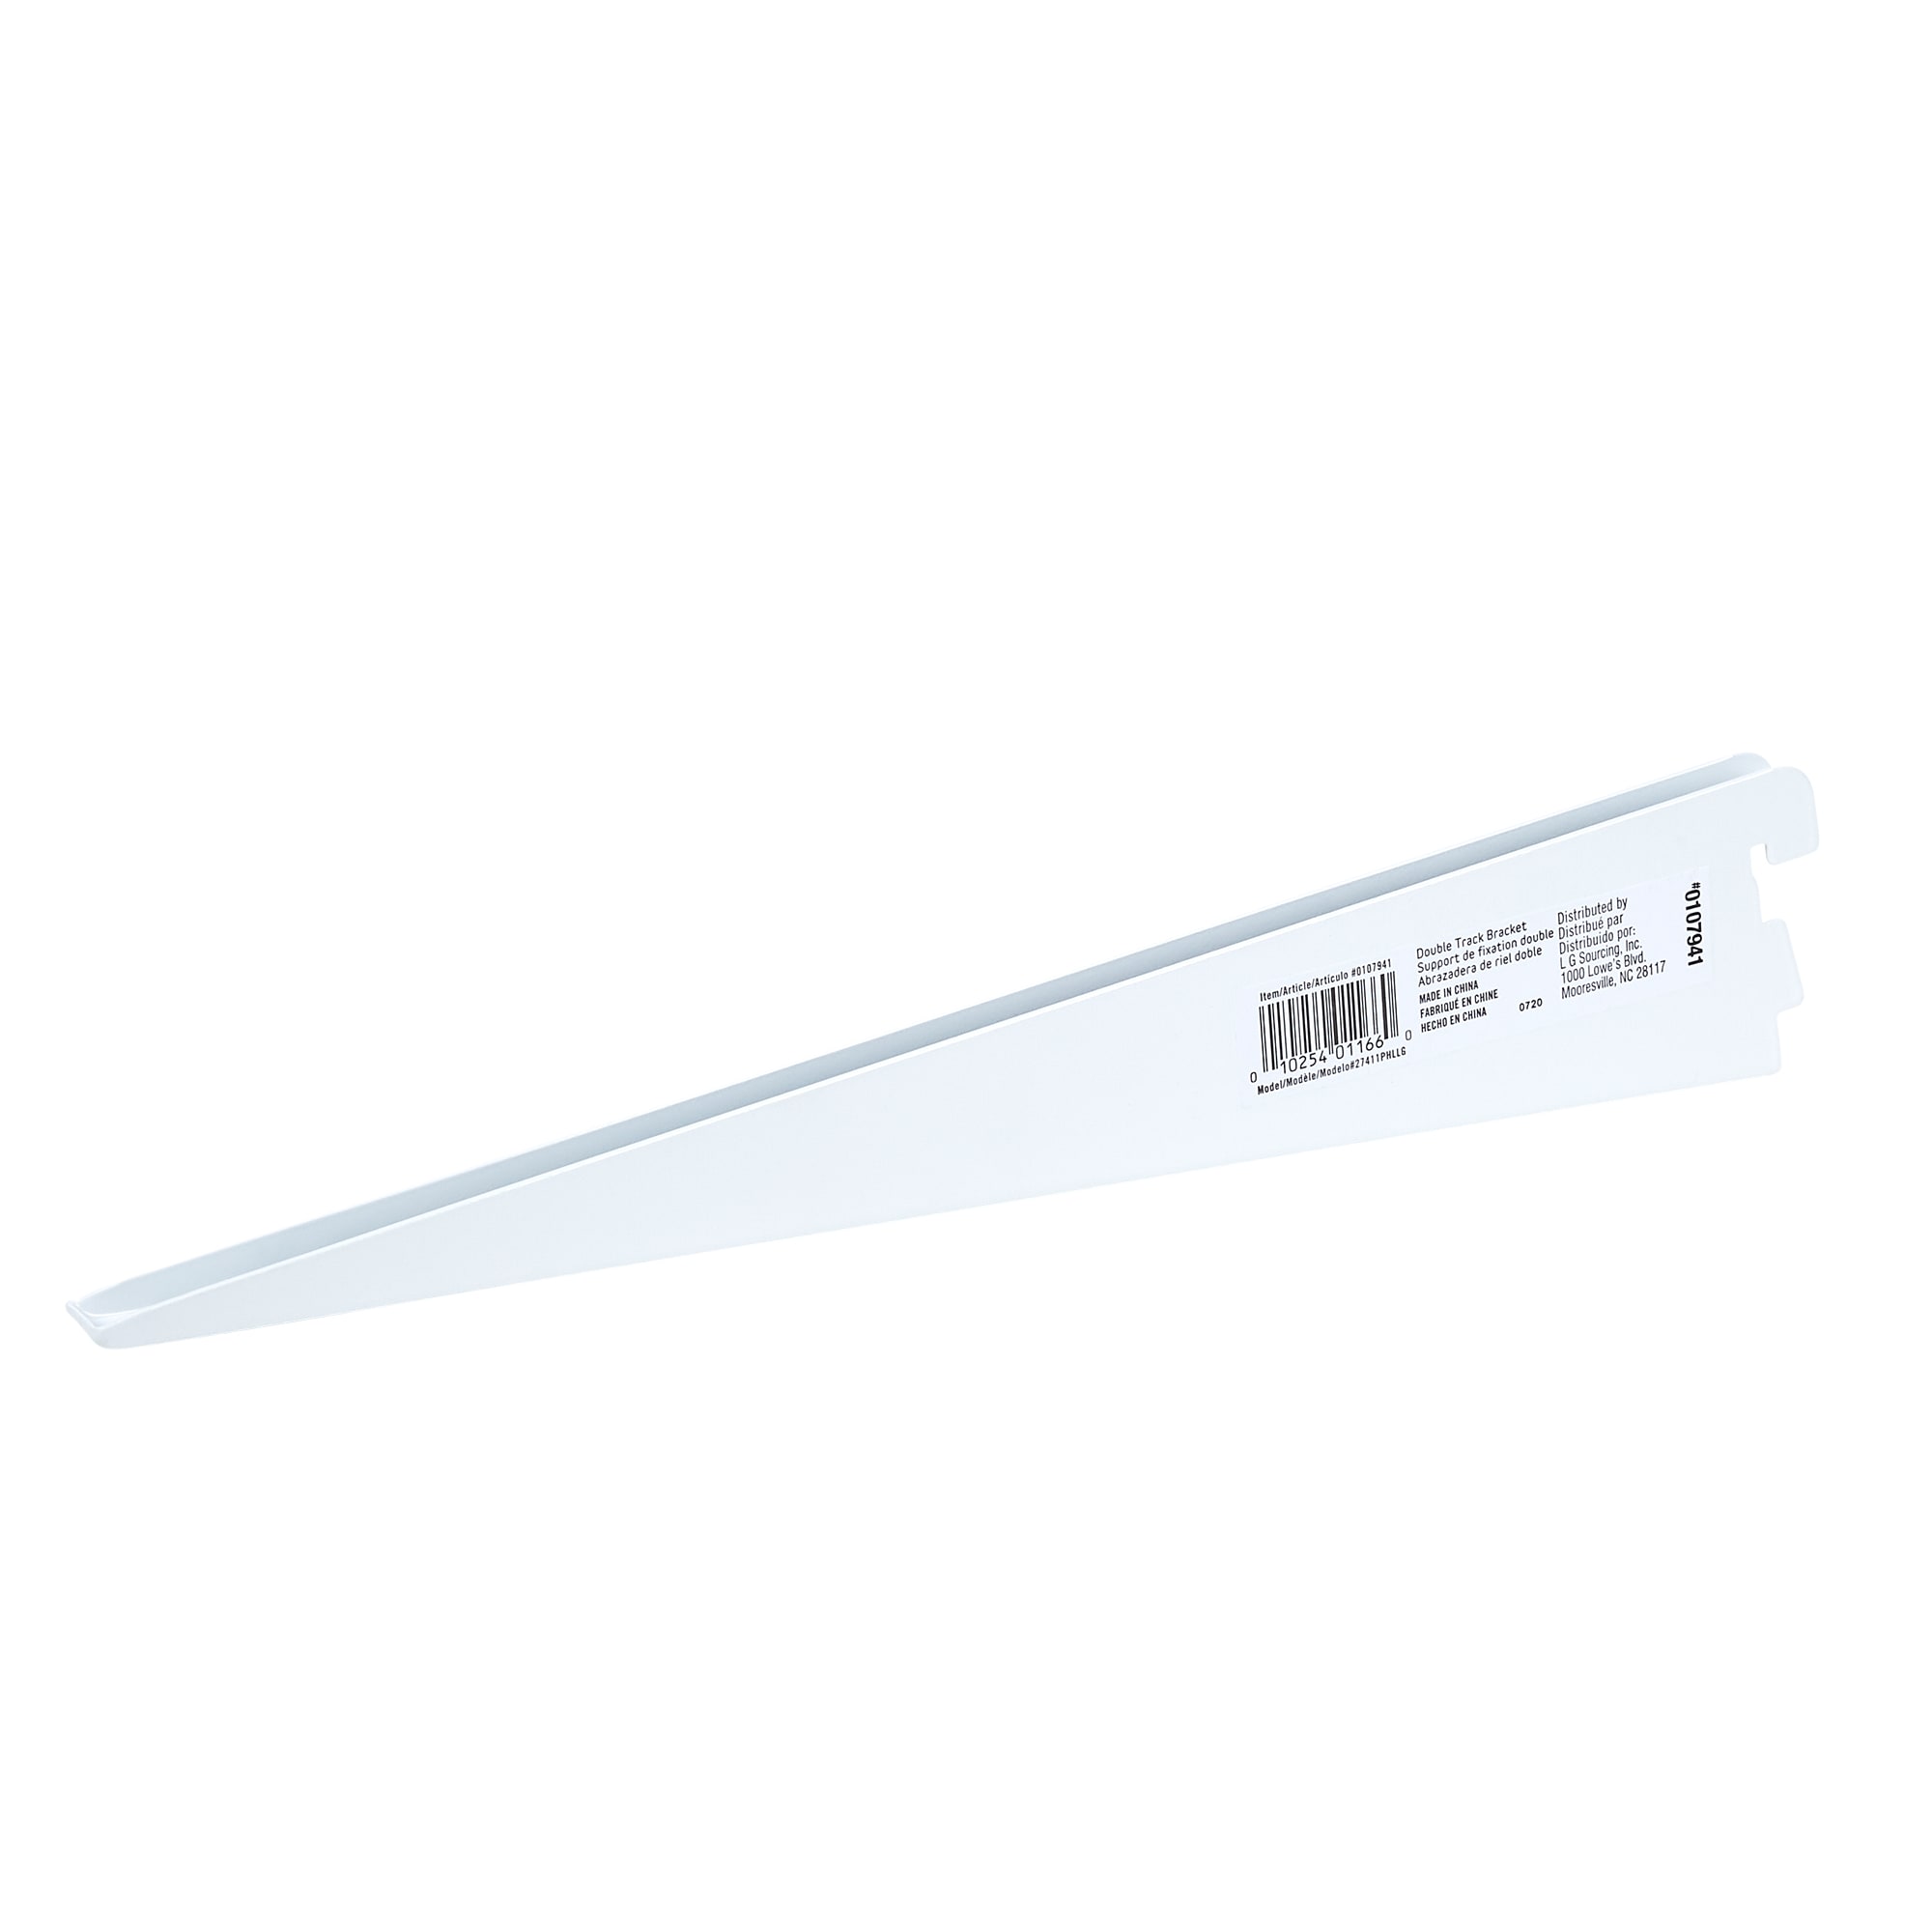 Rubbermaid 9 in. White Twin Track Bracket for Wood Shelving